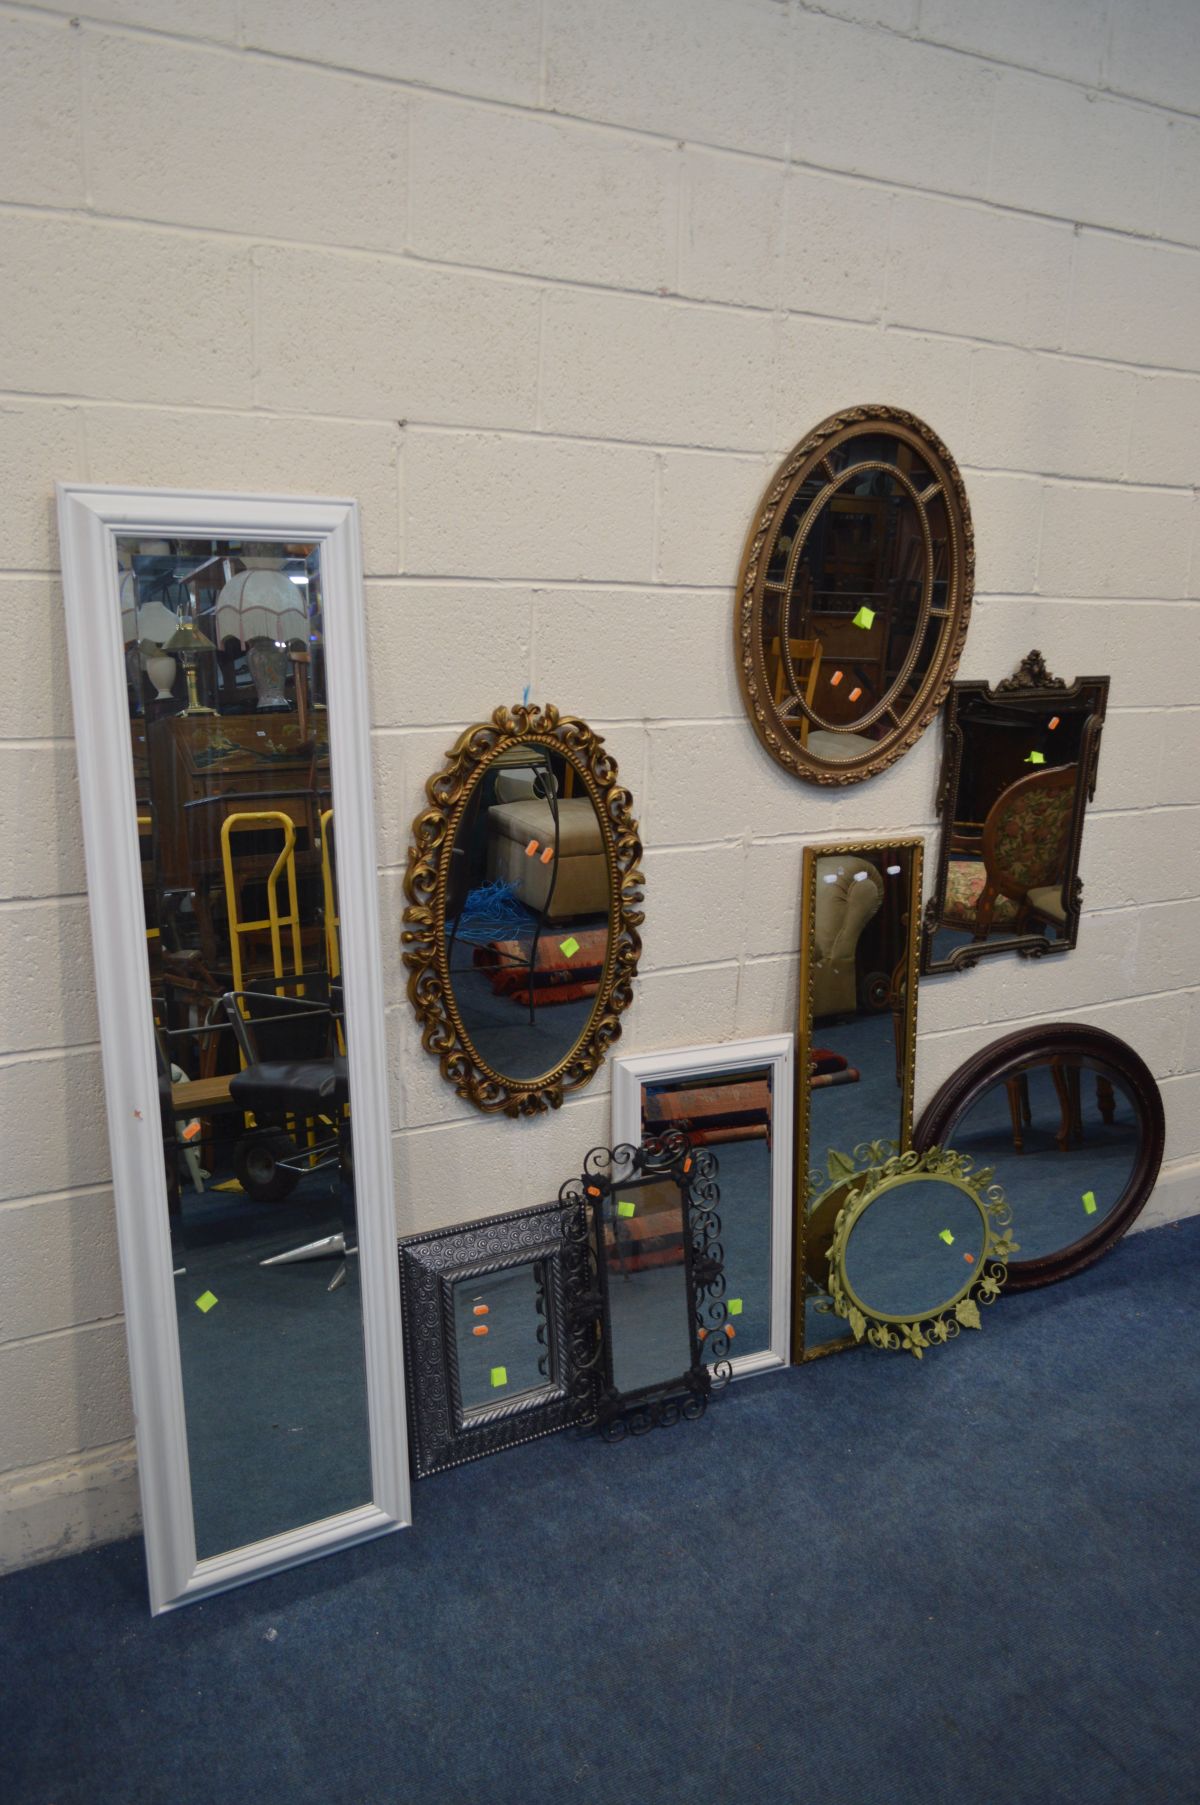 TEN VARIOUS WALL MIRRORS OF VARIOUS STYLES, SIZES MATERIALS